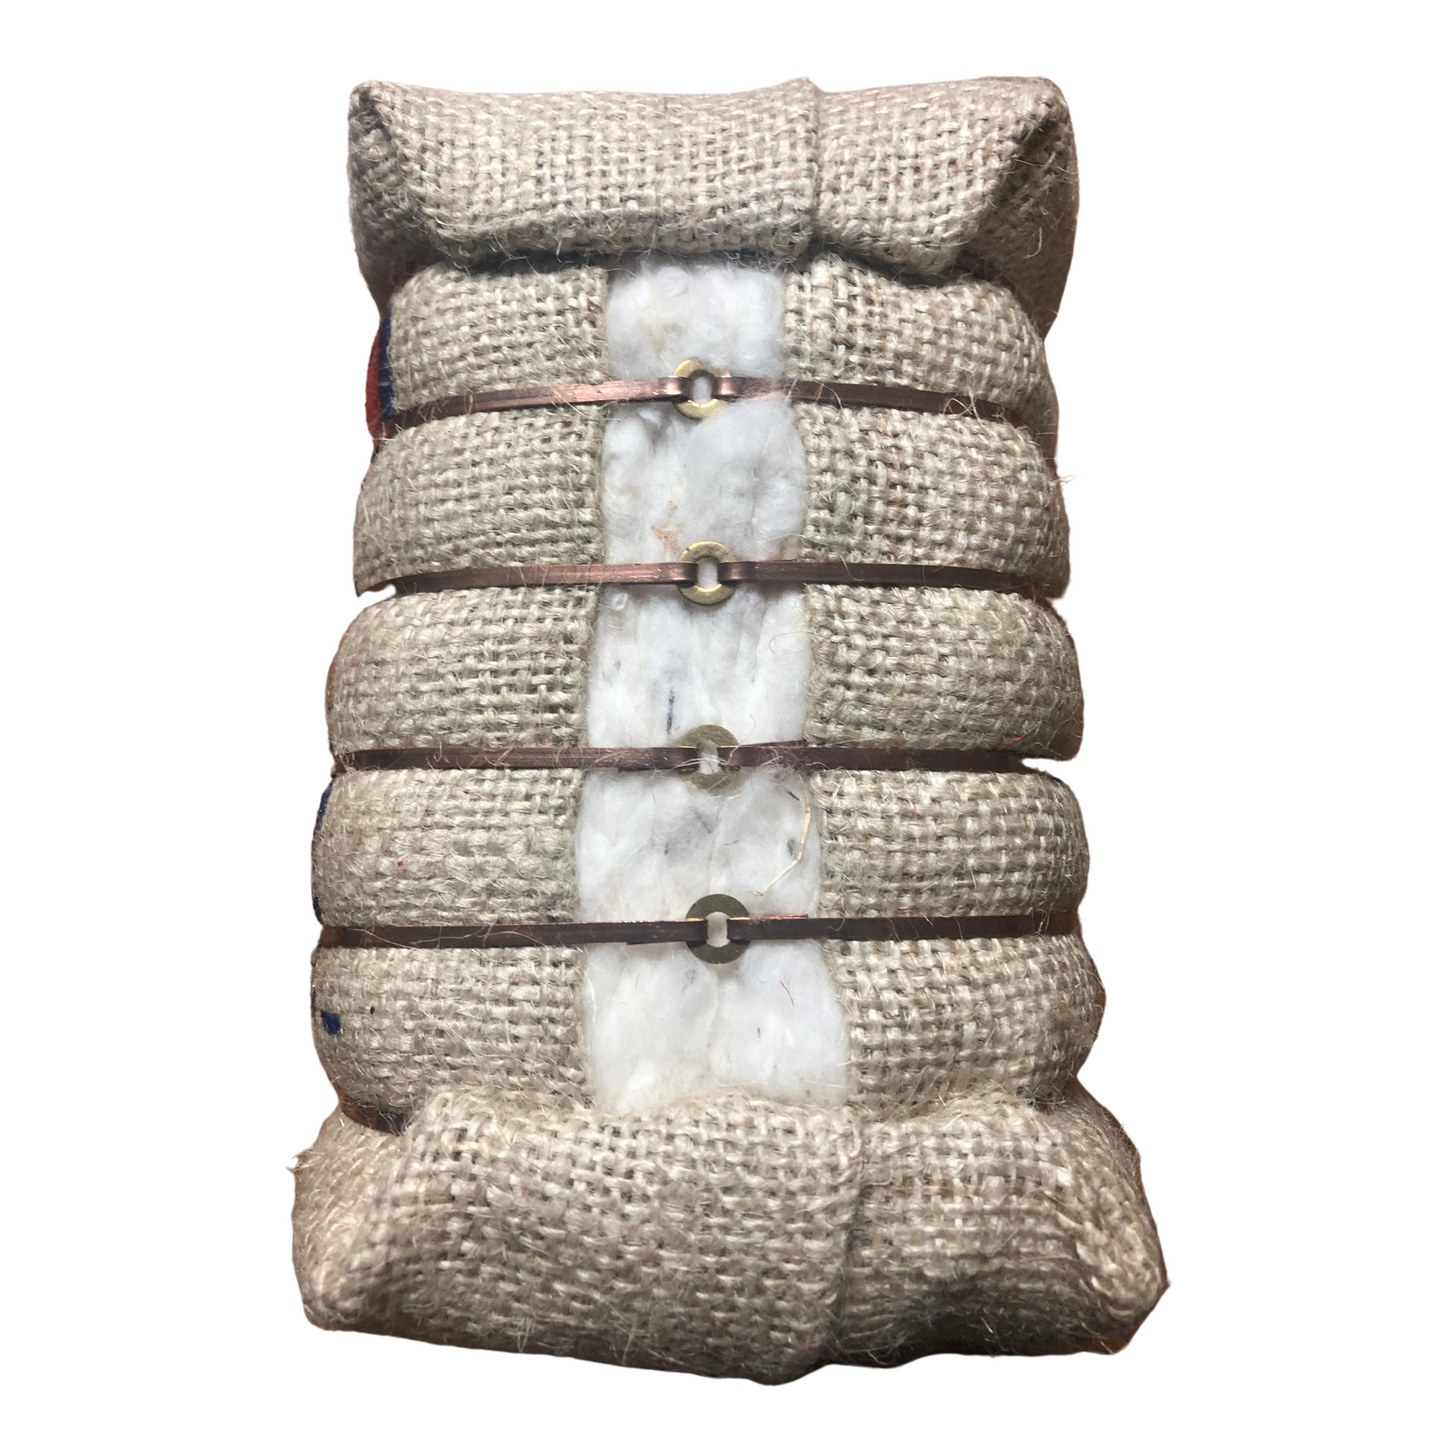 Colonel Traditional Pose 6-Inch Cotton Bale